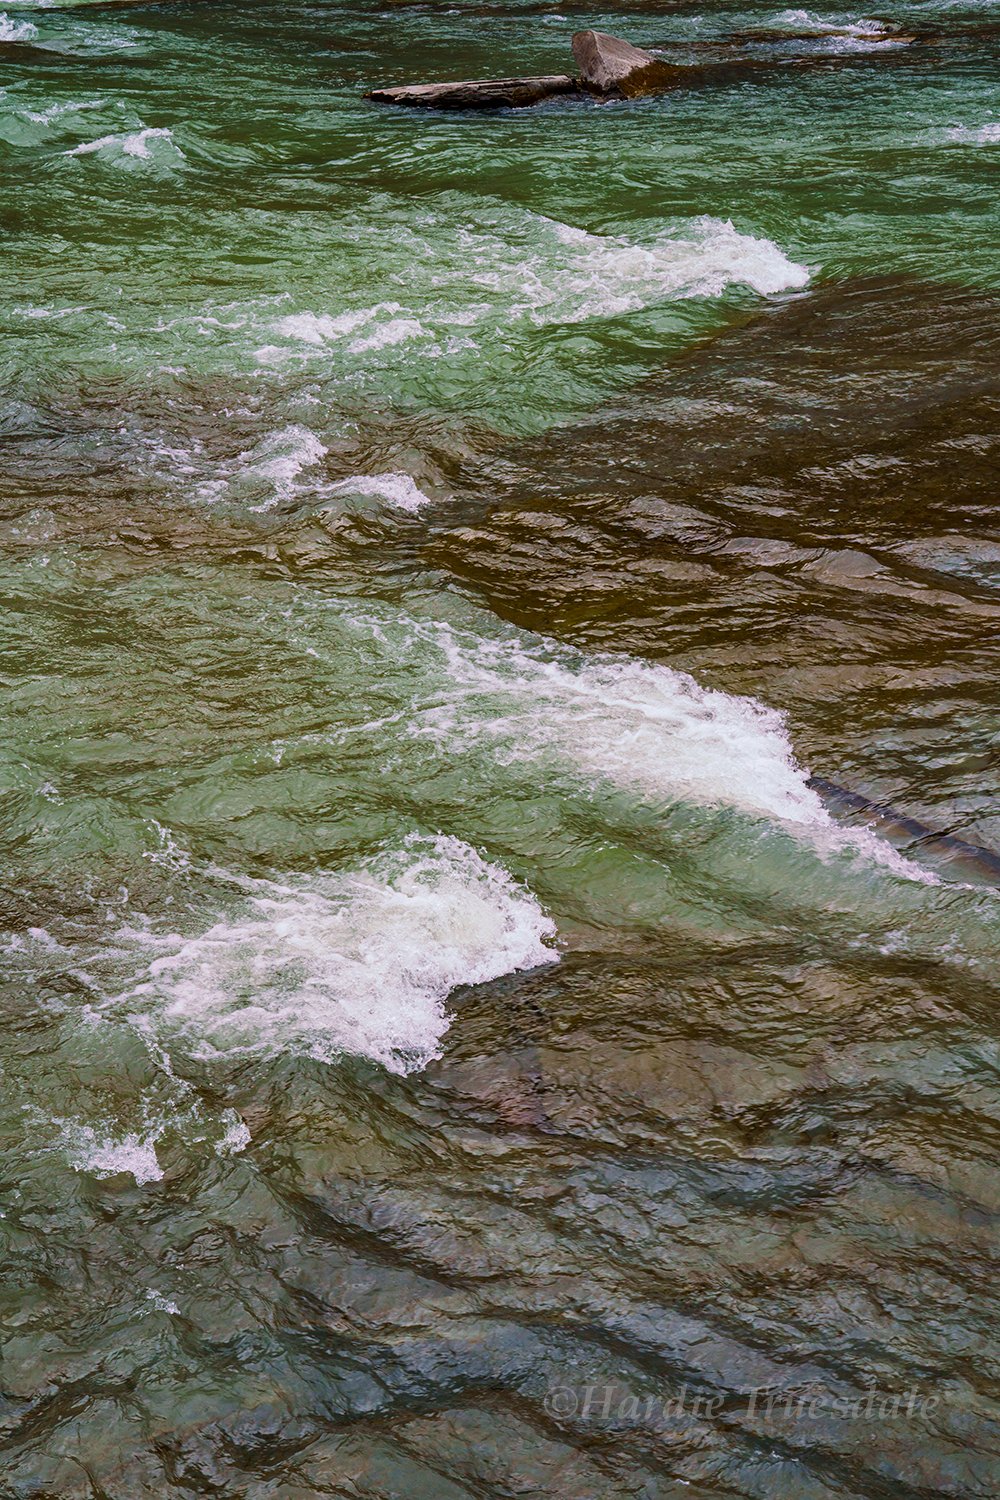 WNY#89 River Textures, Letchworth State Park